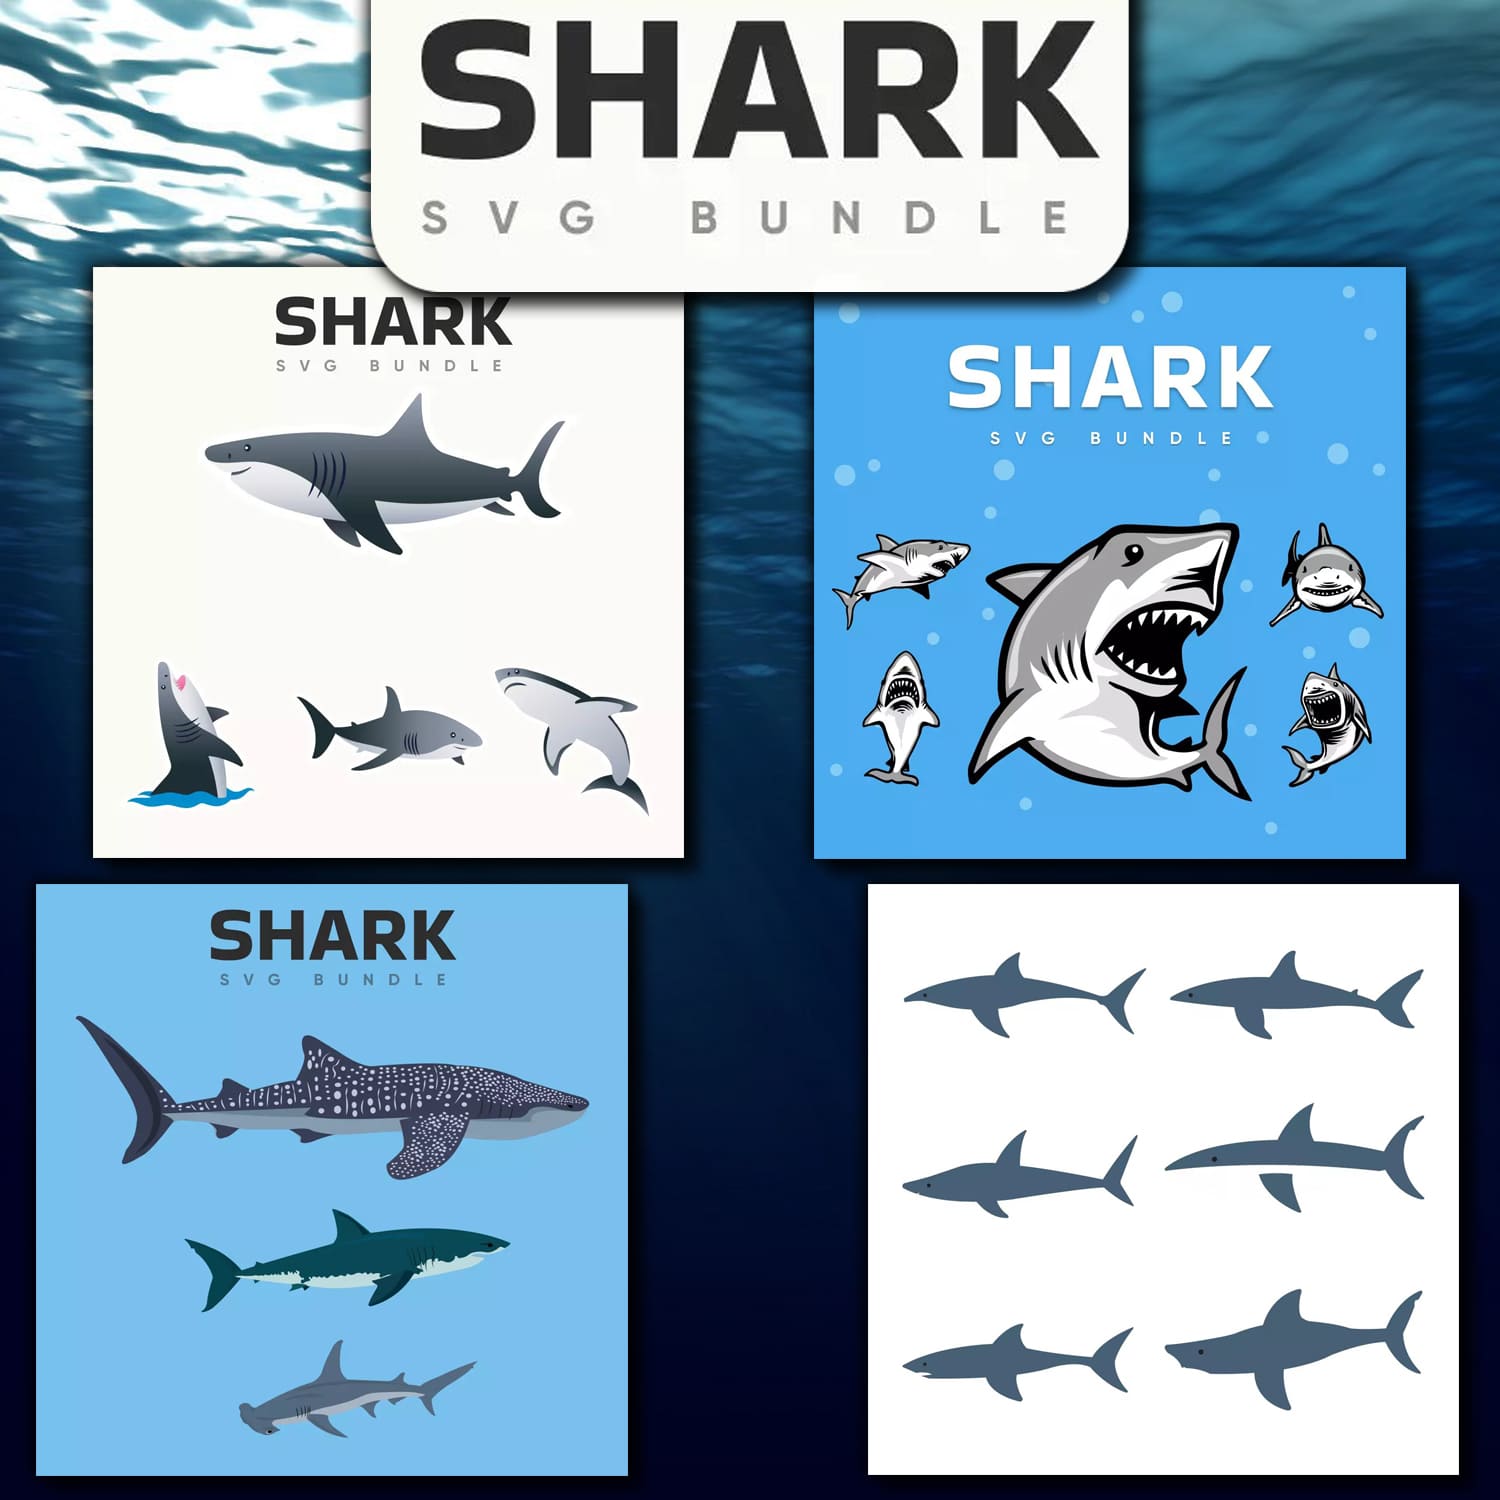 Group of shark pictures on a blue background.